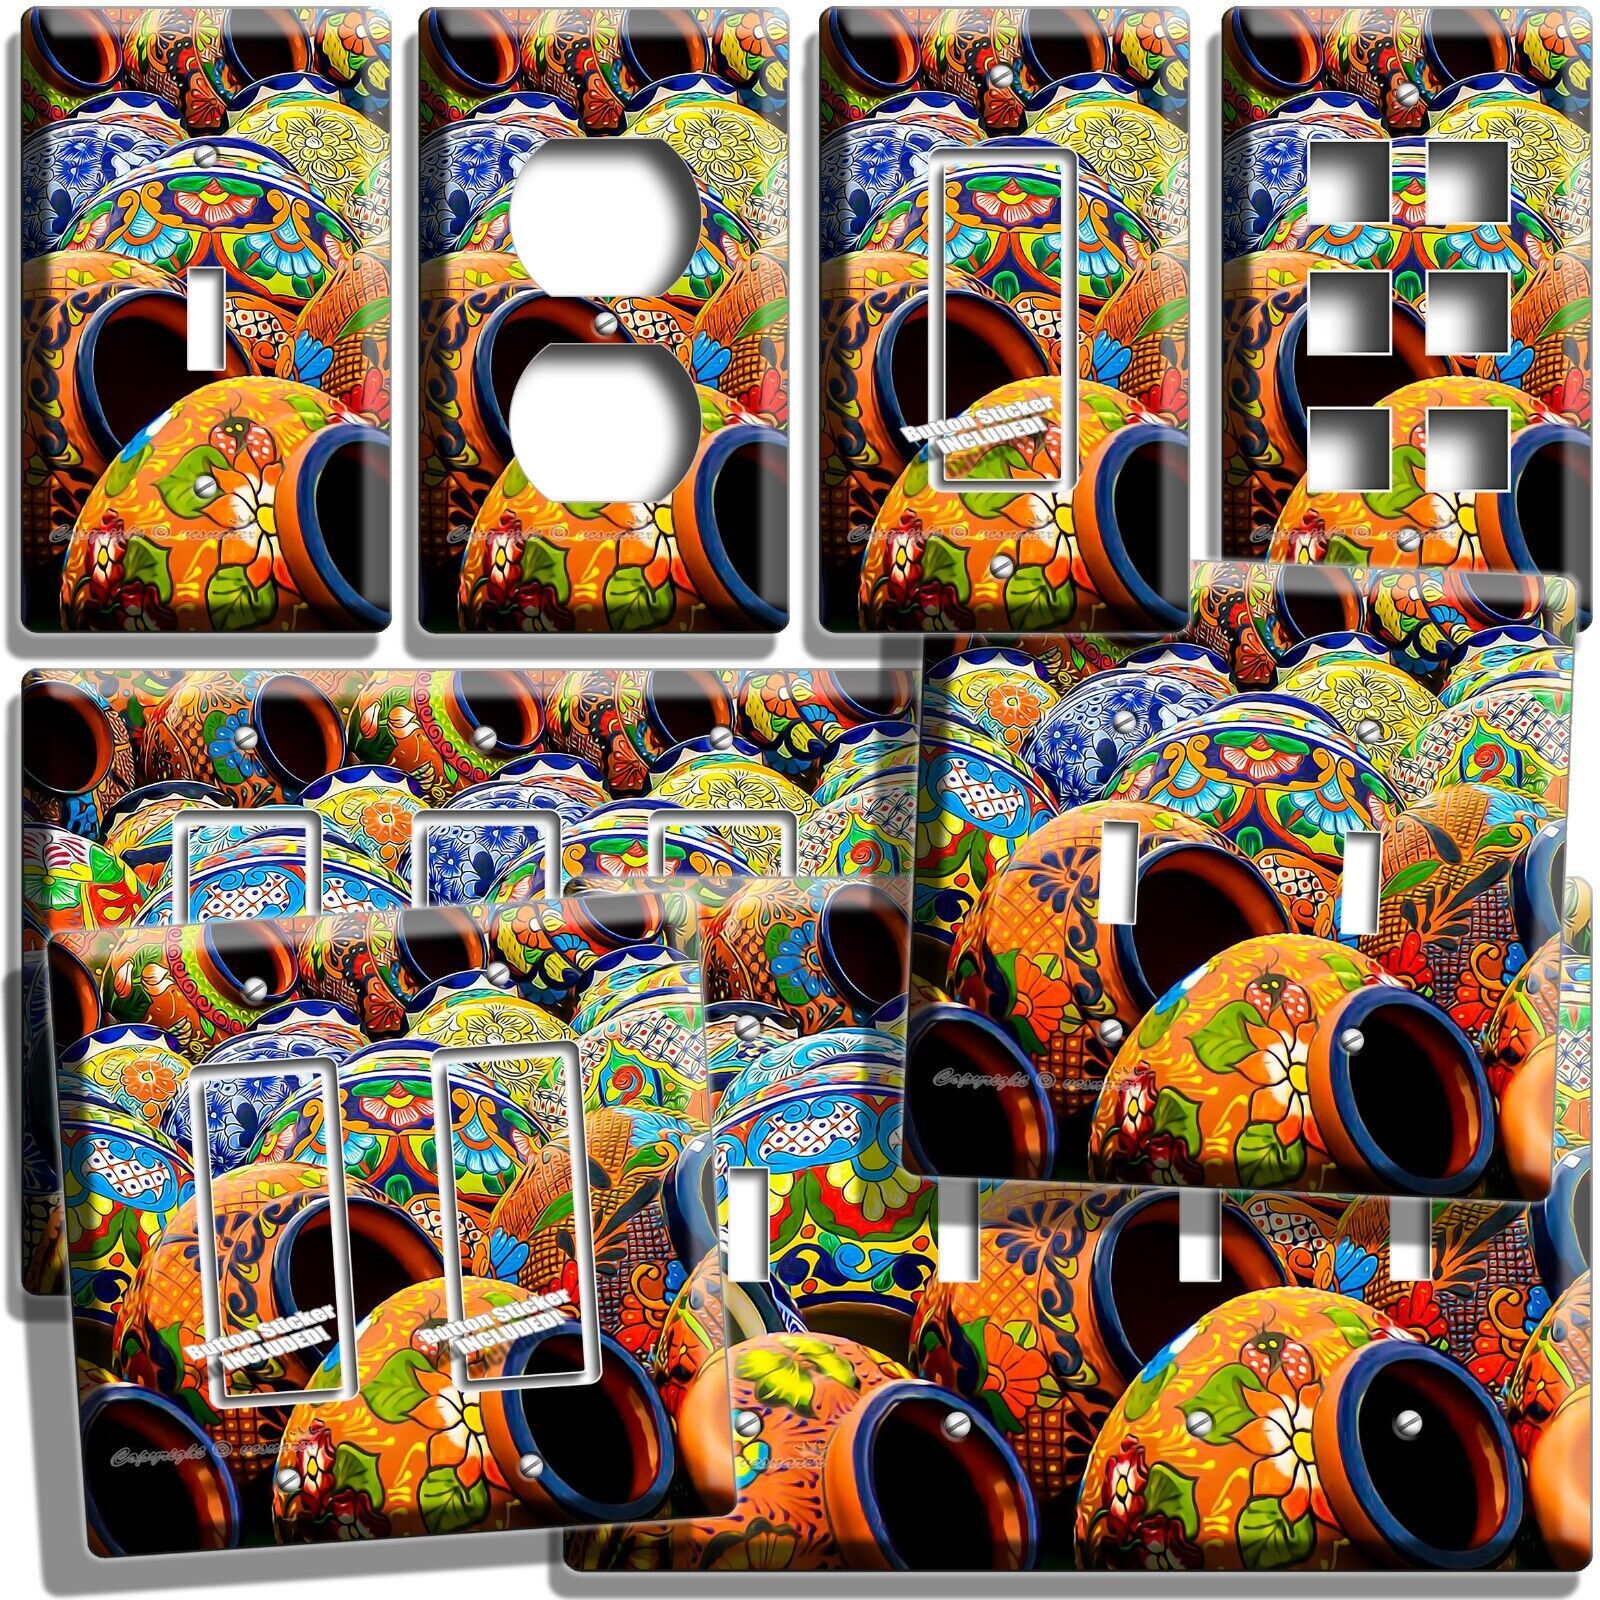 MEXICAN TALAVERA POTS VASES LIGHTSWITCH OUTLET WALL PLATE SOUTHWESTERN ART DECOR - $16.37 - $26.38